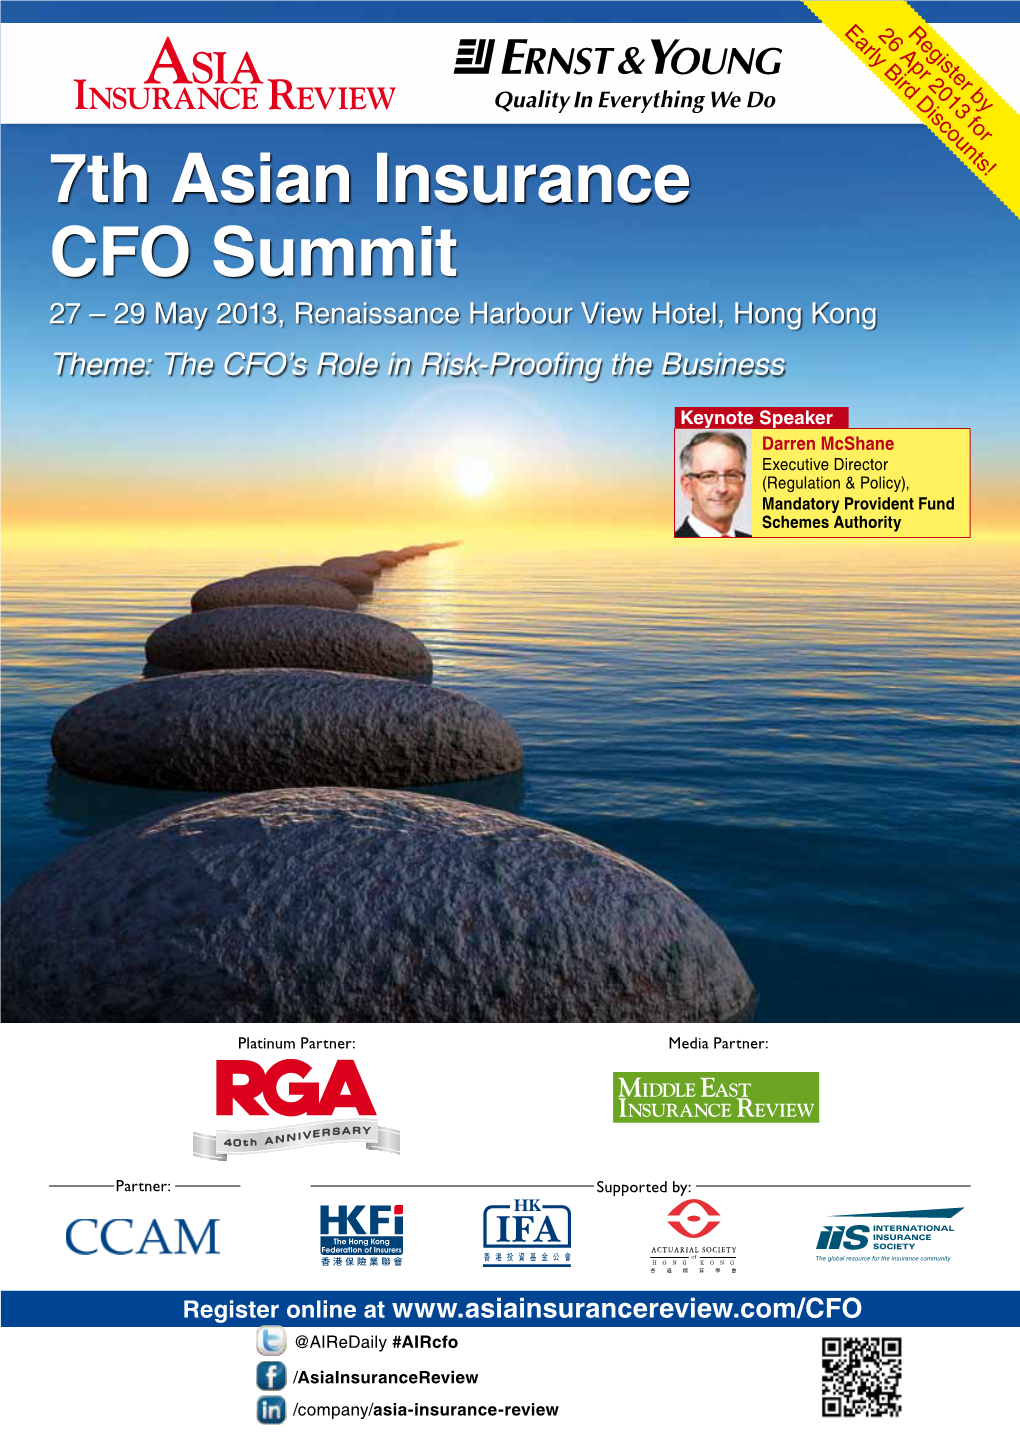 7Th Asian Insurance CFO Summit 27 – 29 May 2013, Renaissance Harbour View Hotel, Hong Kong Theme: the CFO’S Role in Risk-Proofing the Business